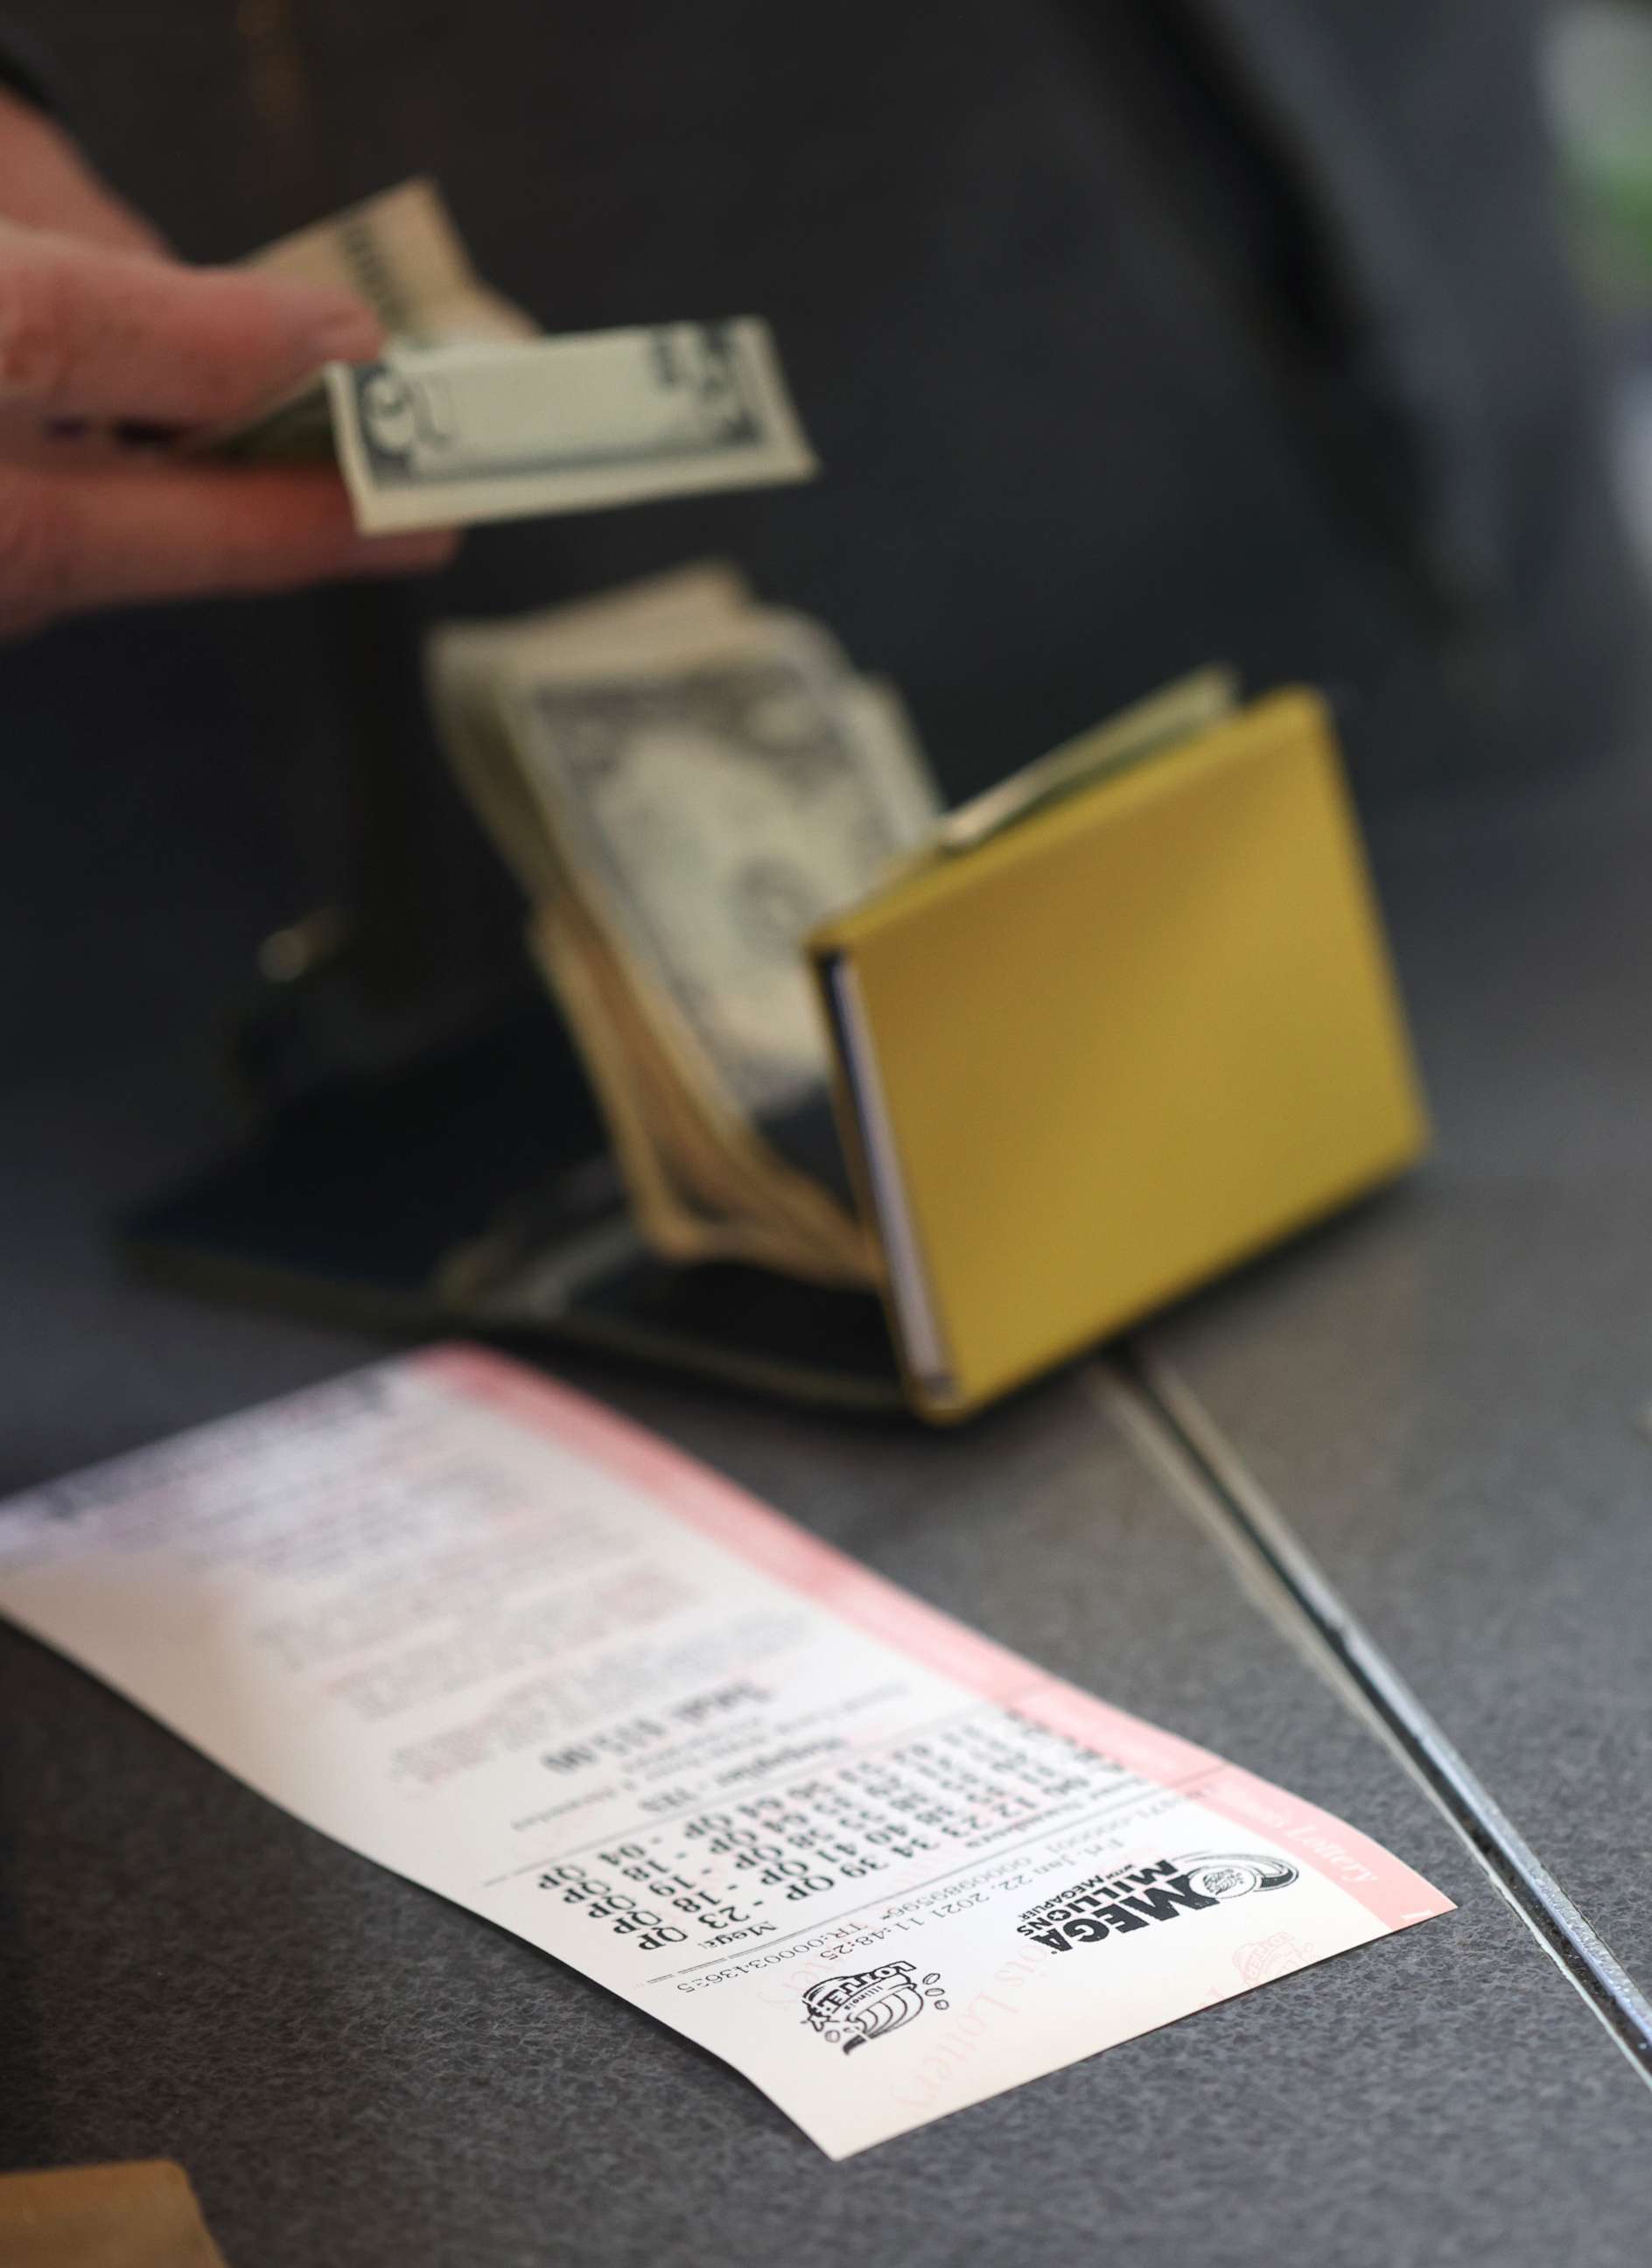 PHOTO: A customer purchases a Mega Millions lottery ticket in Chicago, Jan. 22, 2021.